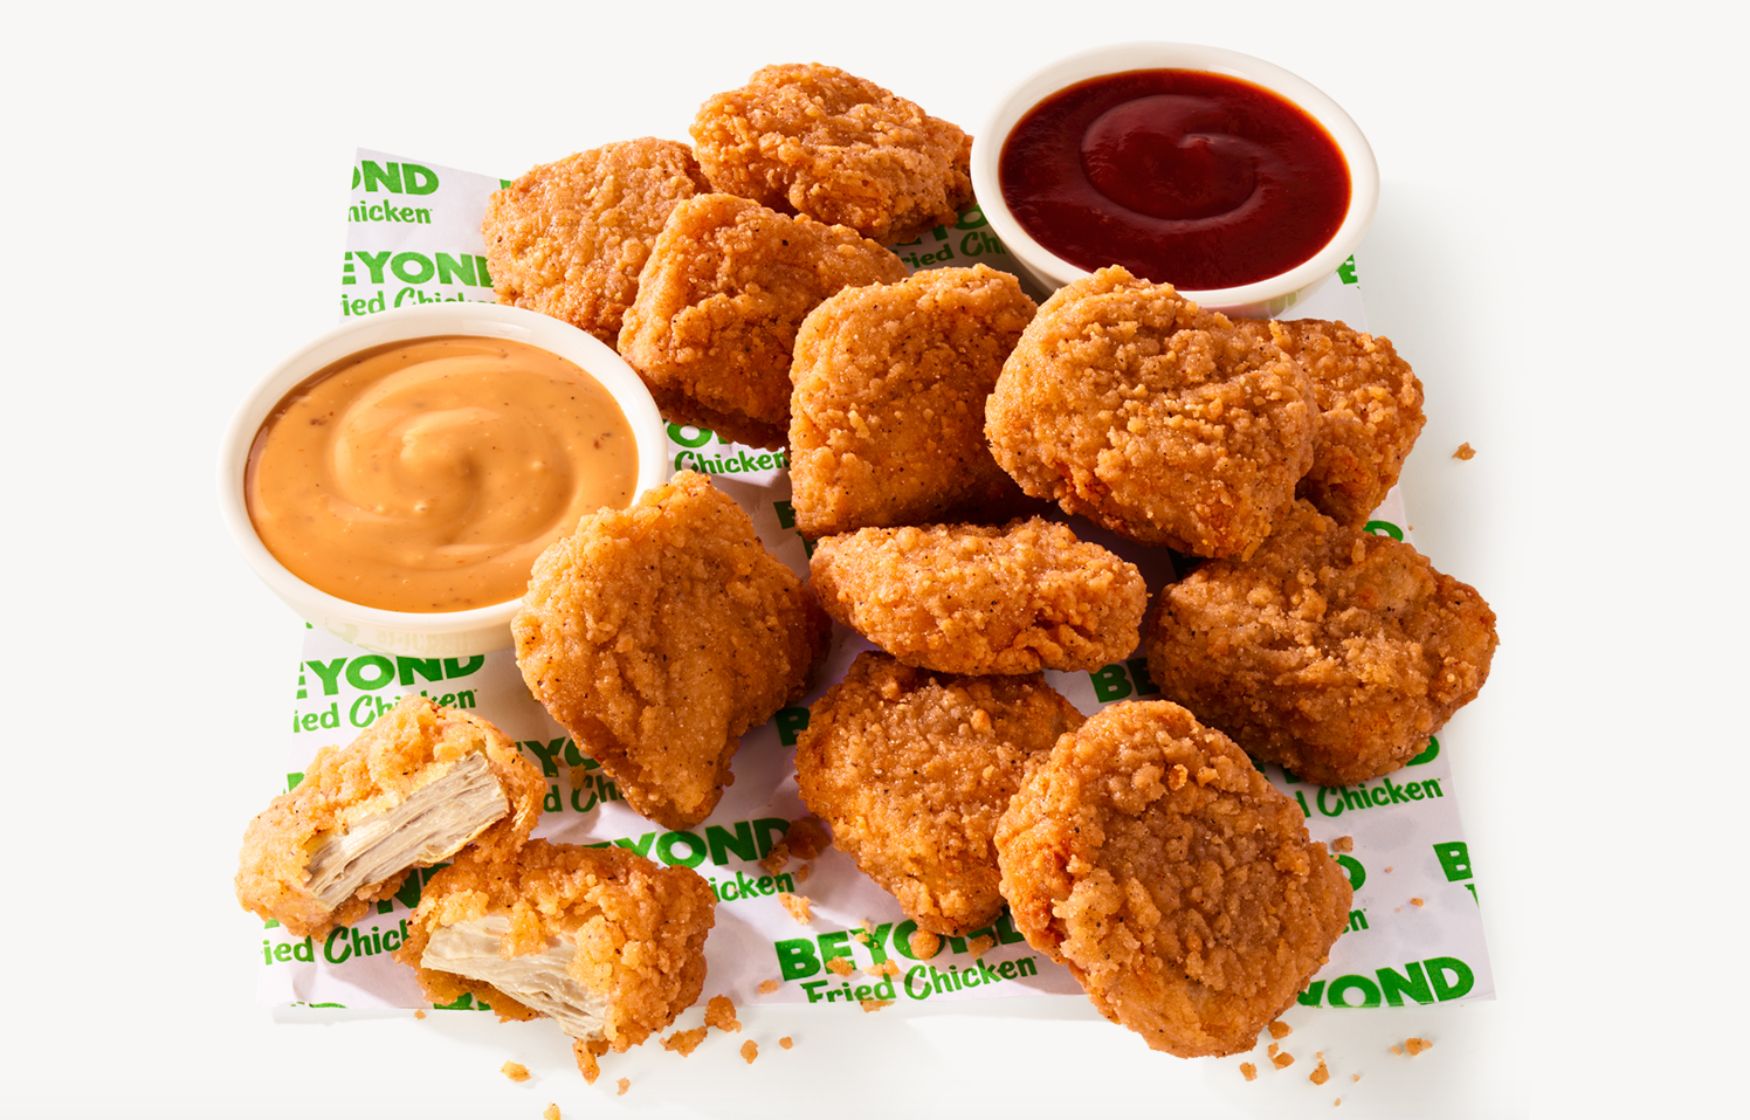 Plant Based Beyond Fried Chicken Launches at Kentucky Fried Chicken